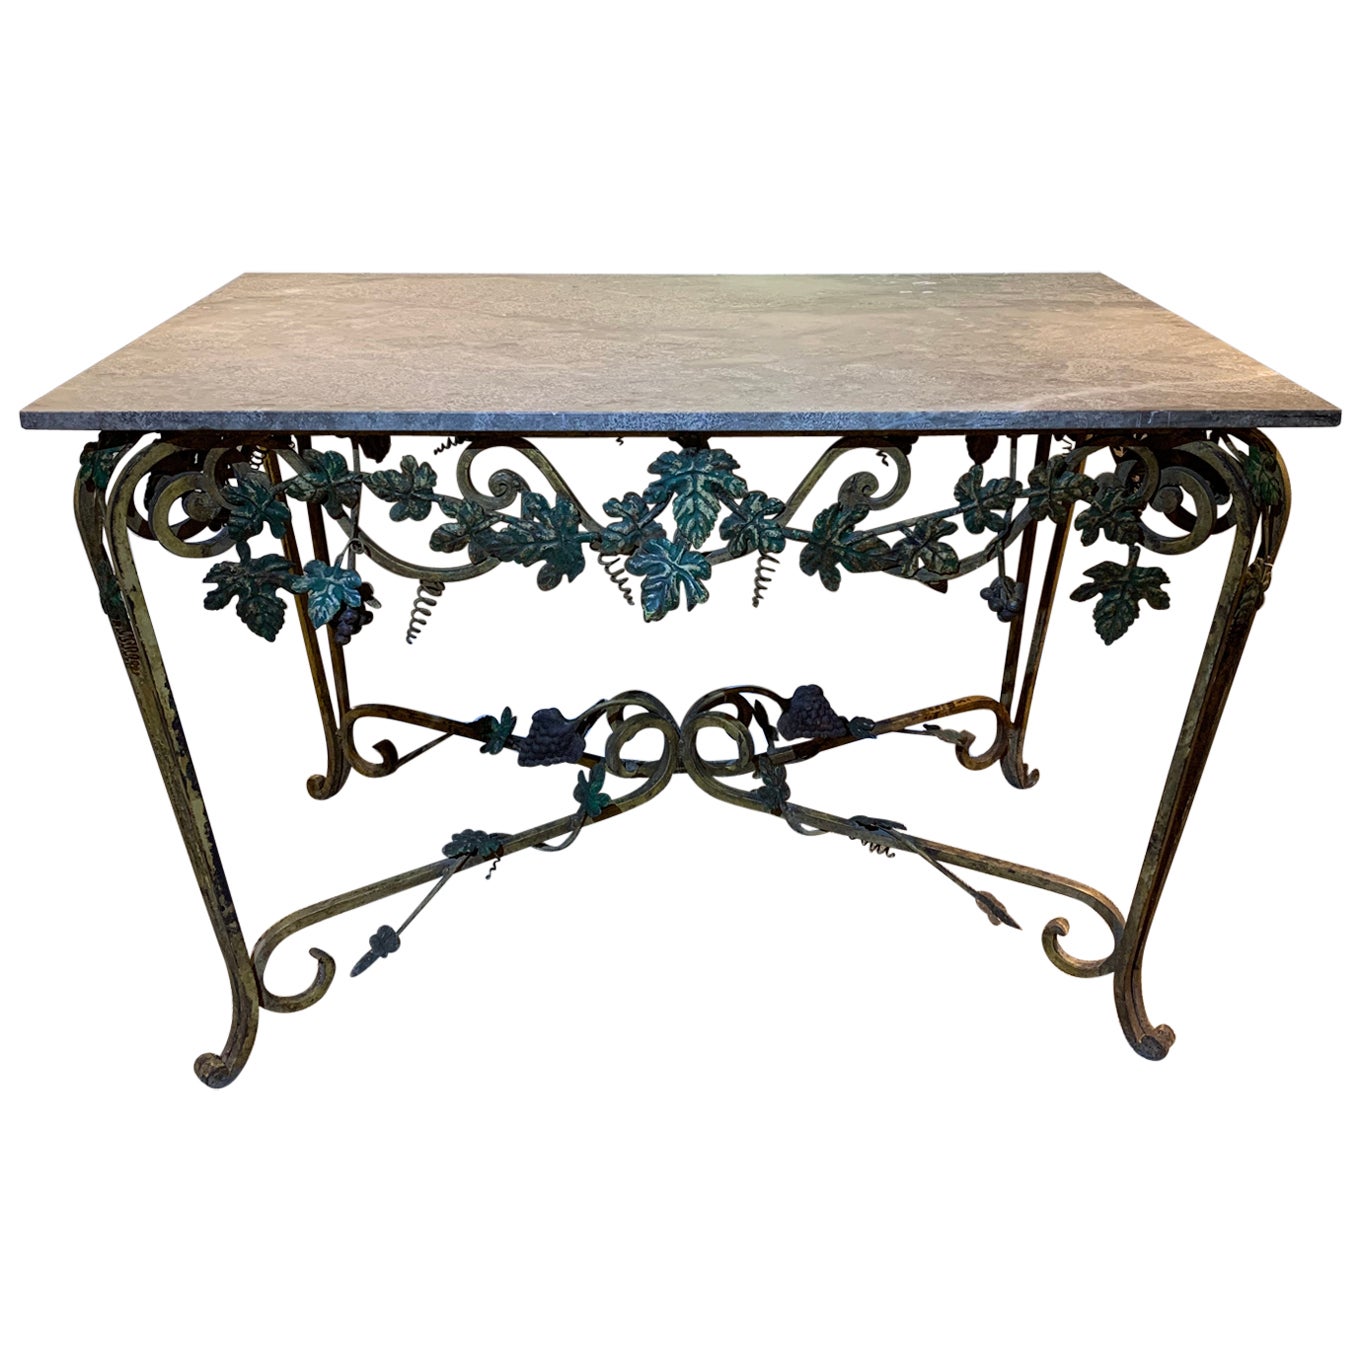 Midcentury French Wrought Iron & Marble Console Table with Leaf Decoration